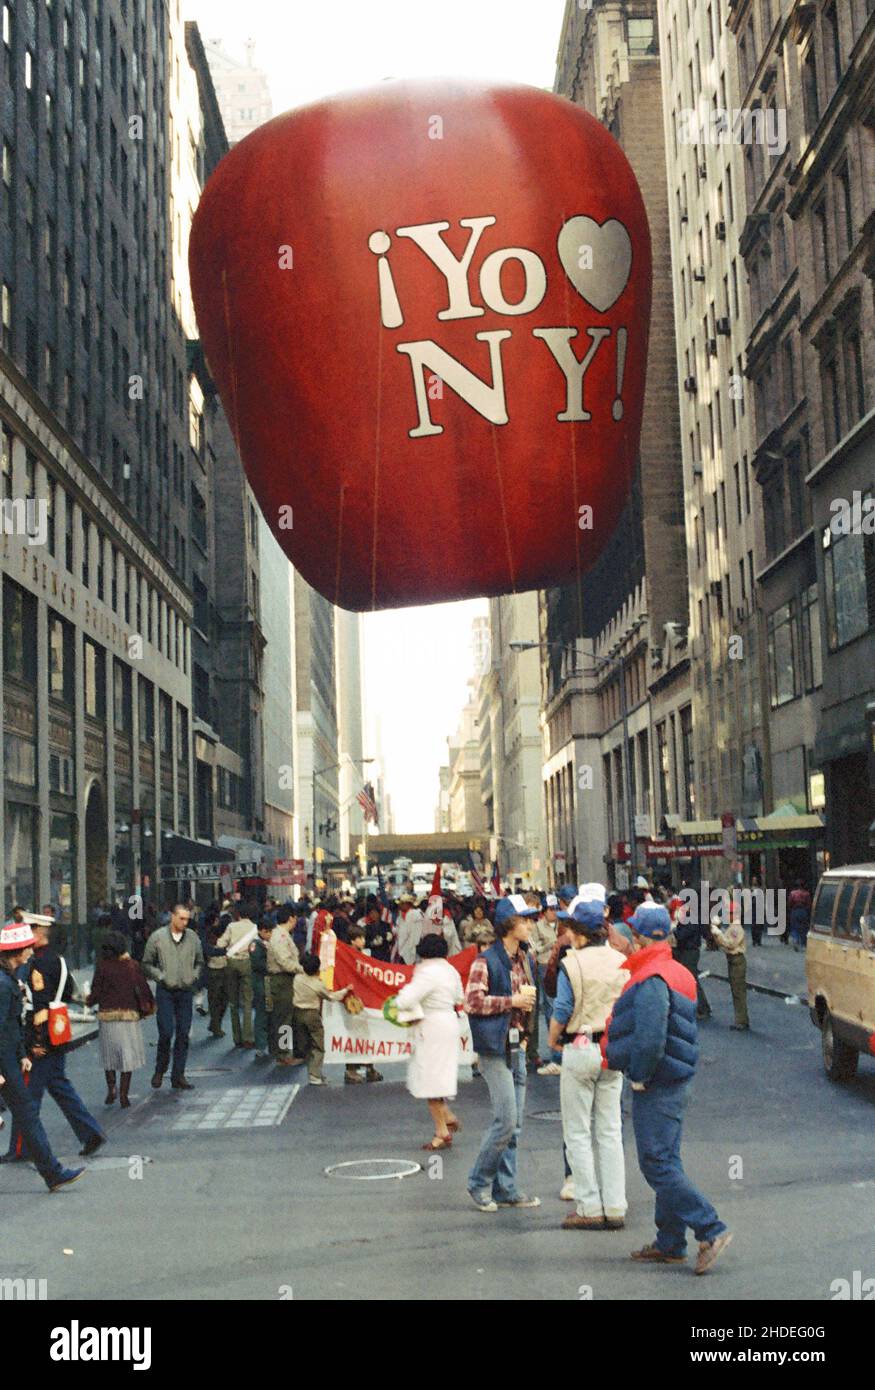 Crowds gather in the streets with a Big Apple balloon for the Columbus Day parade in the early eighties in New York, USA Stock Photo